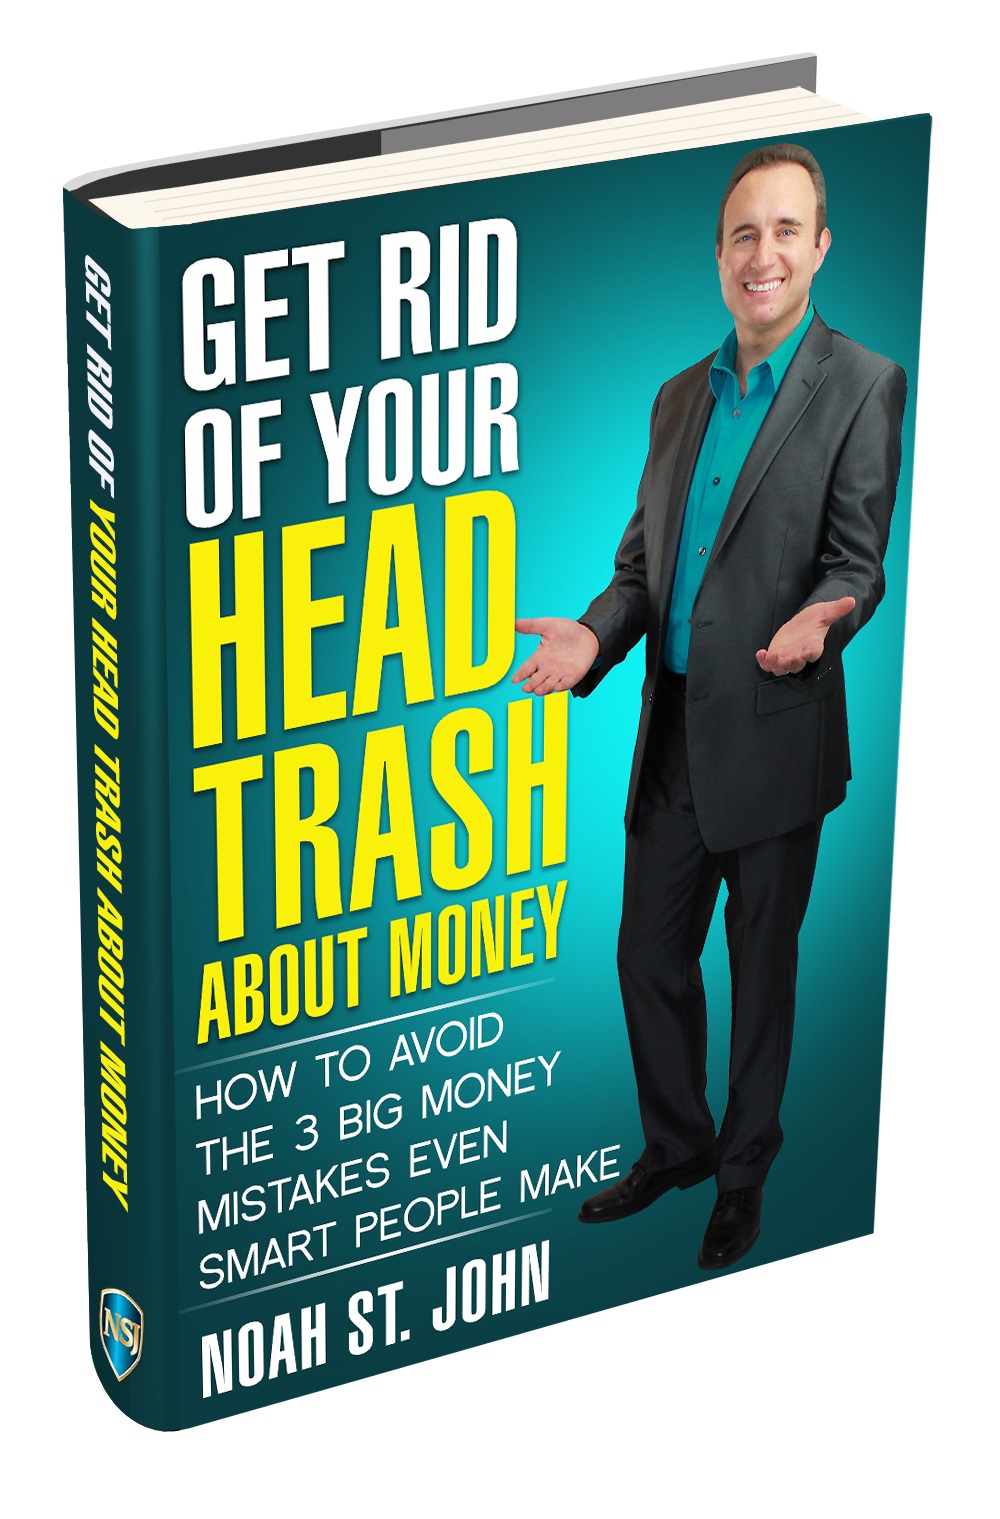 How to Get Rid of Your Head Trash About Money By Noah St. John